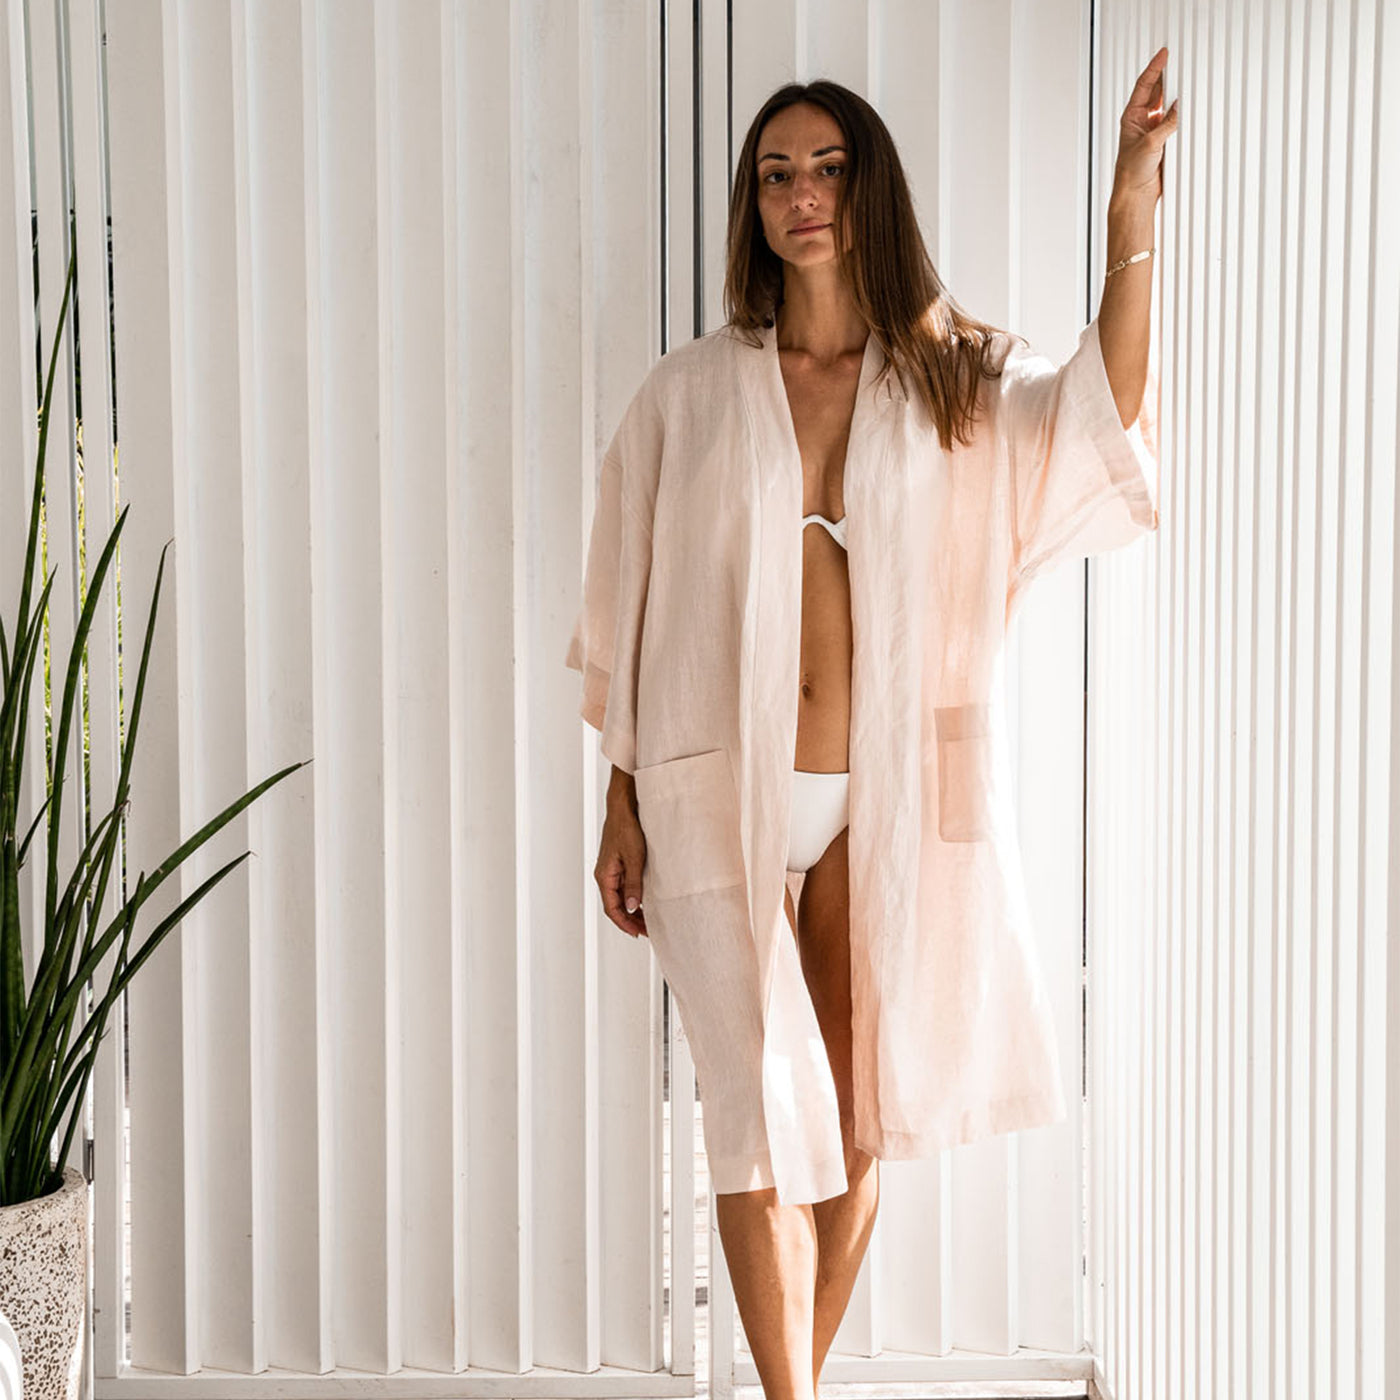 French Flax Linen Robe in Blush